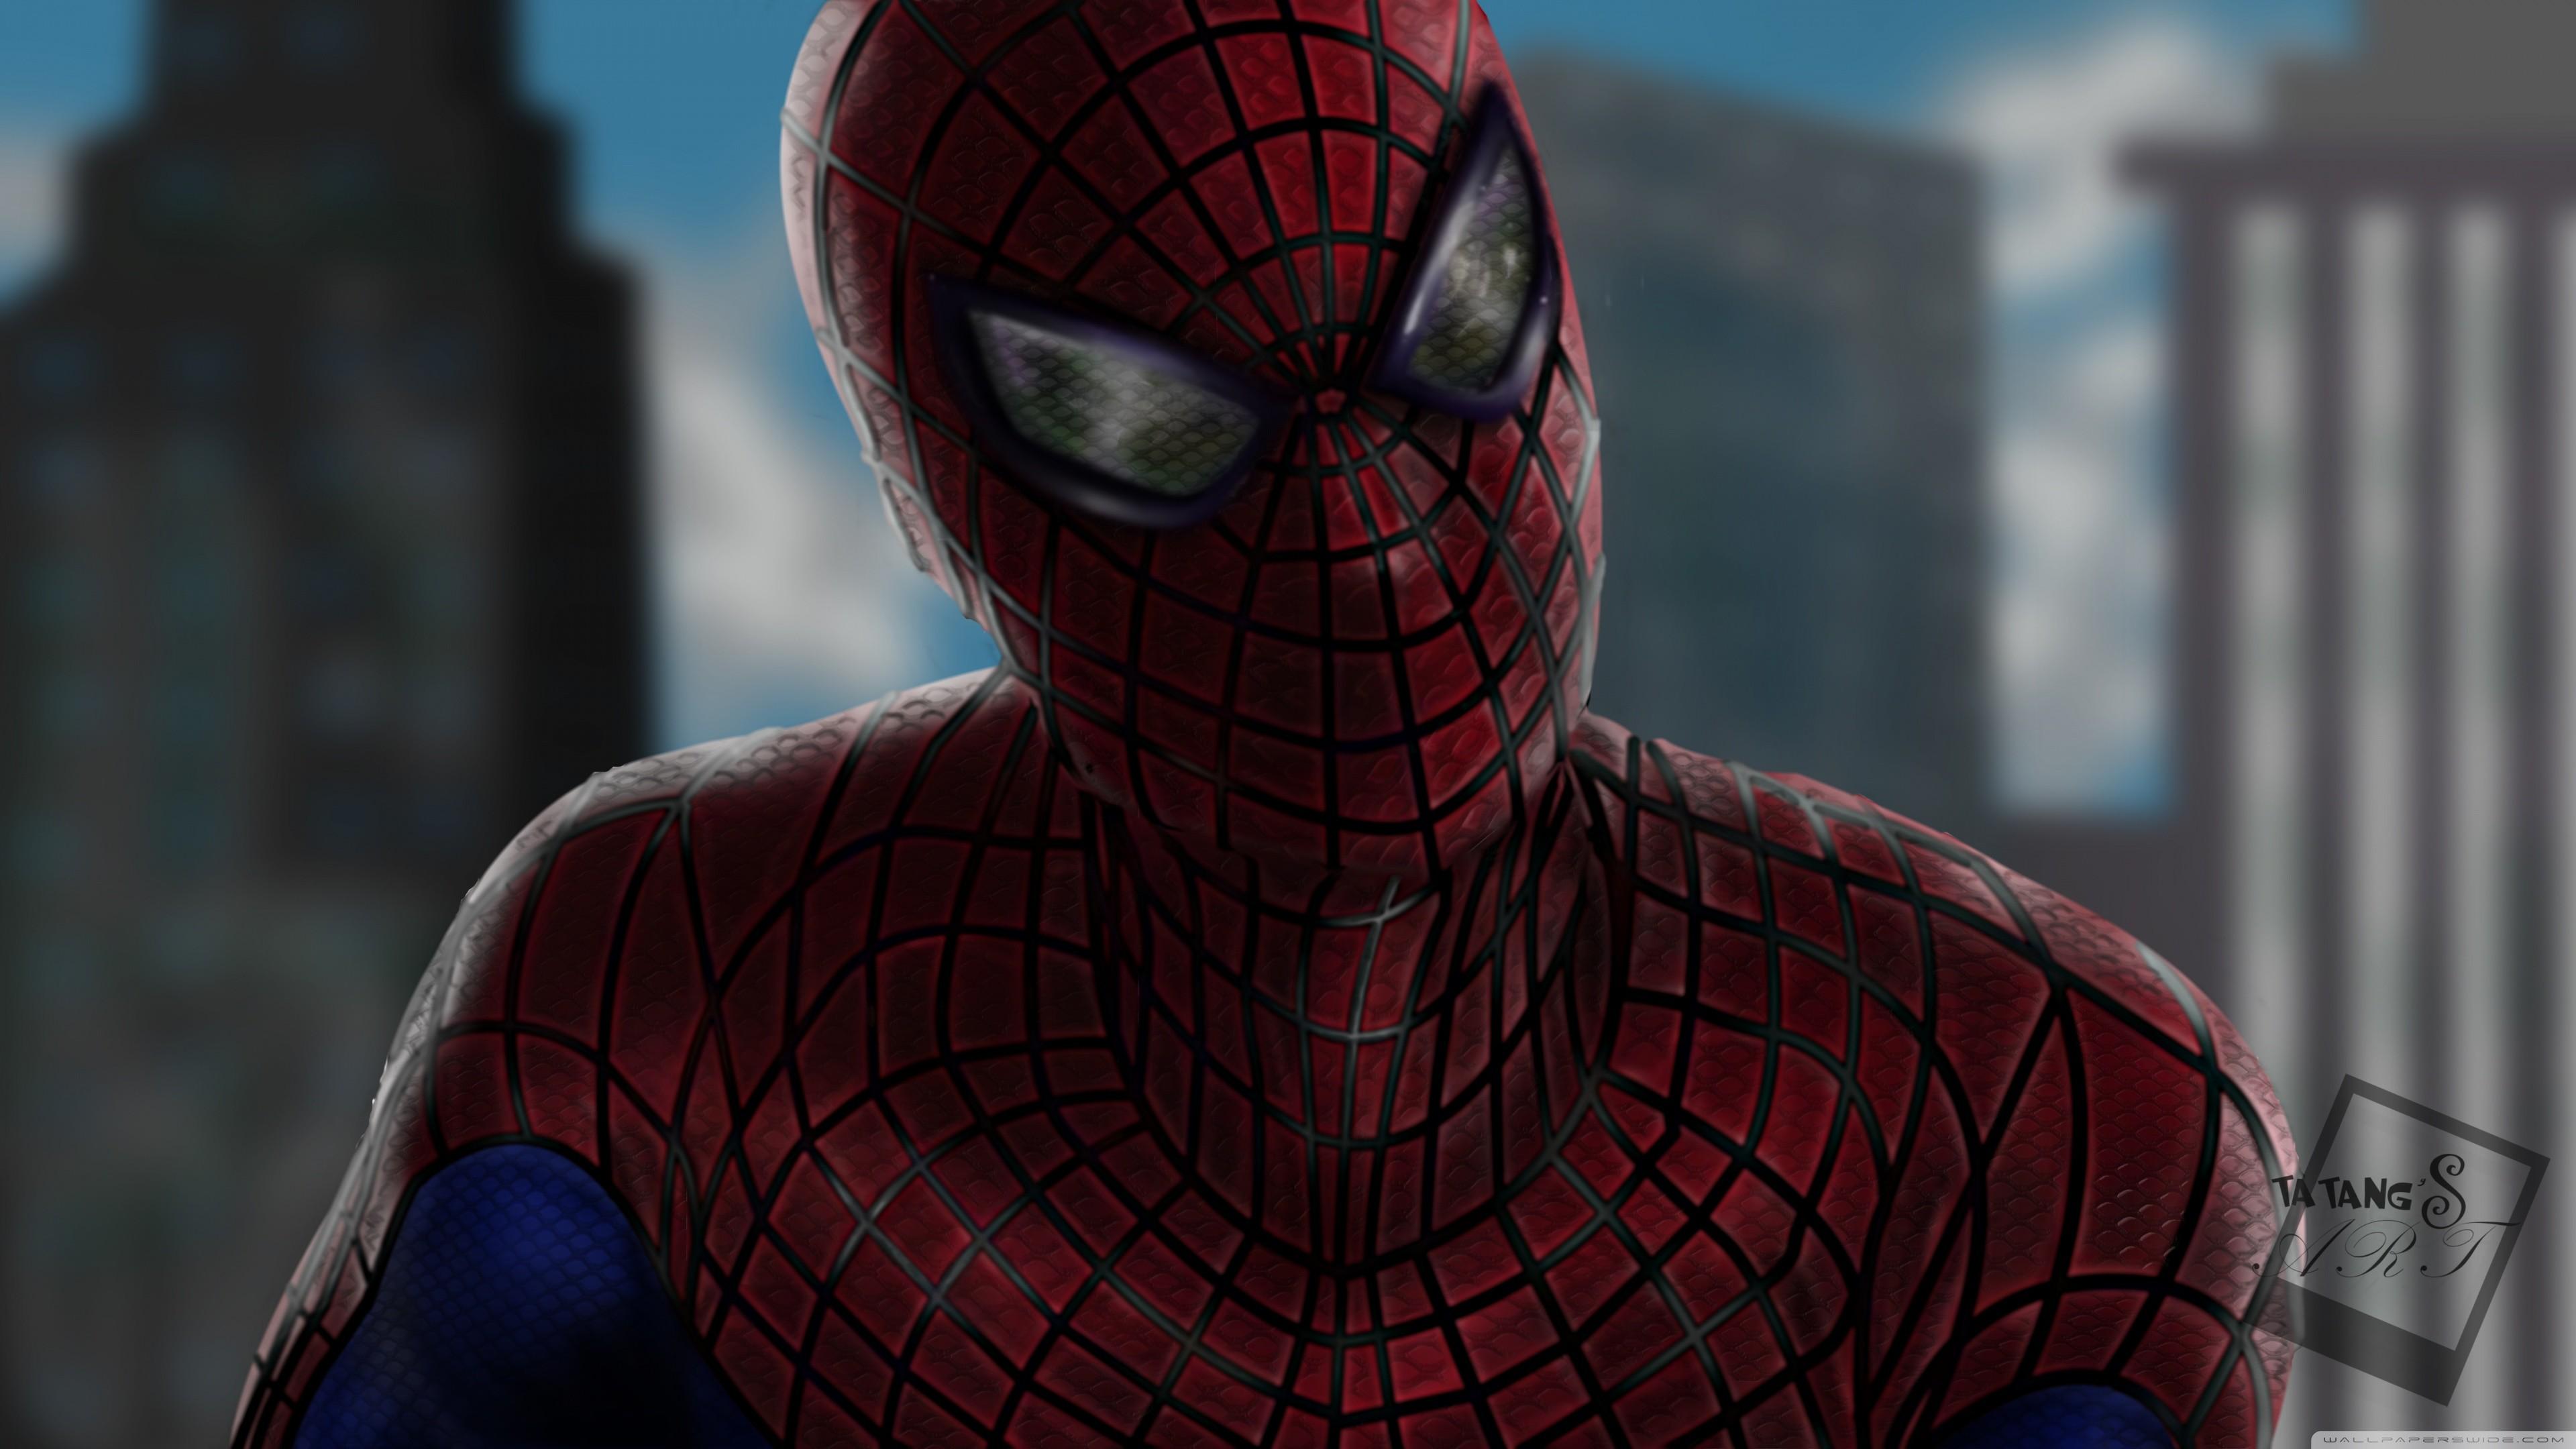 4k hd wallpaper for pc spider man